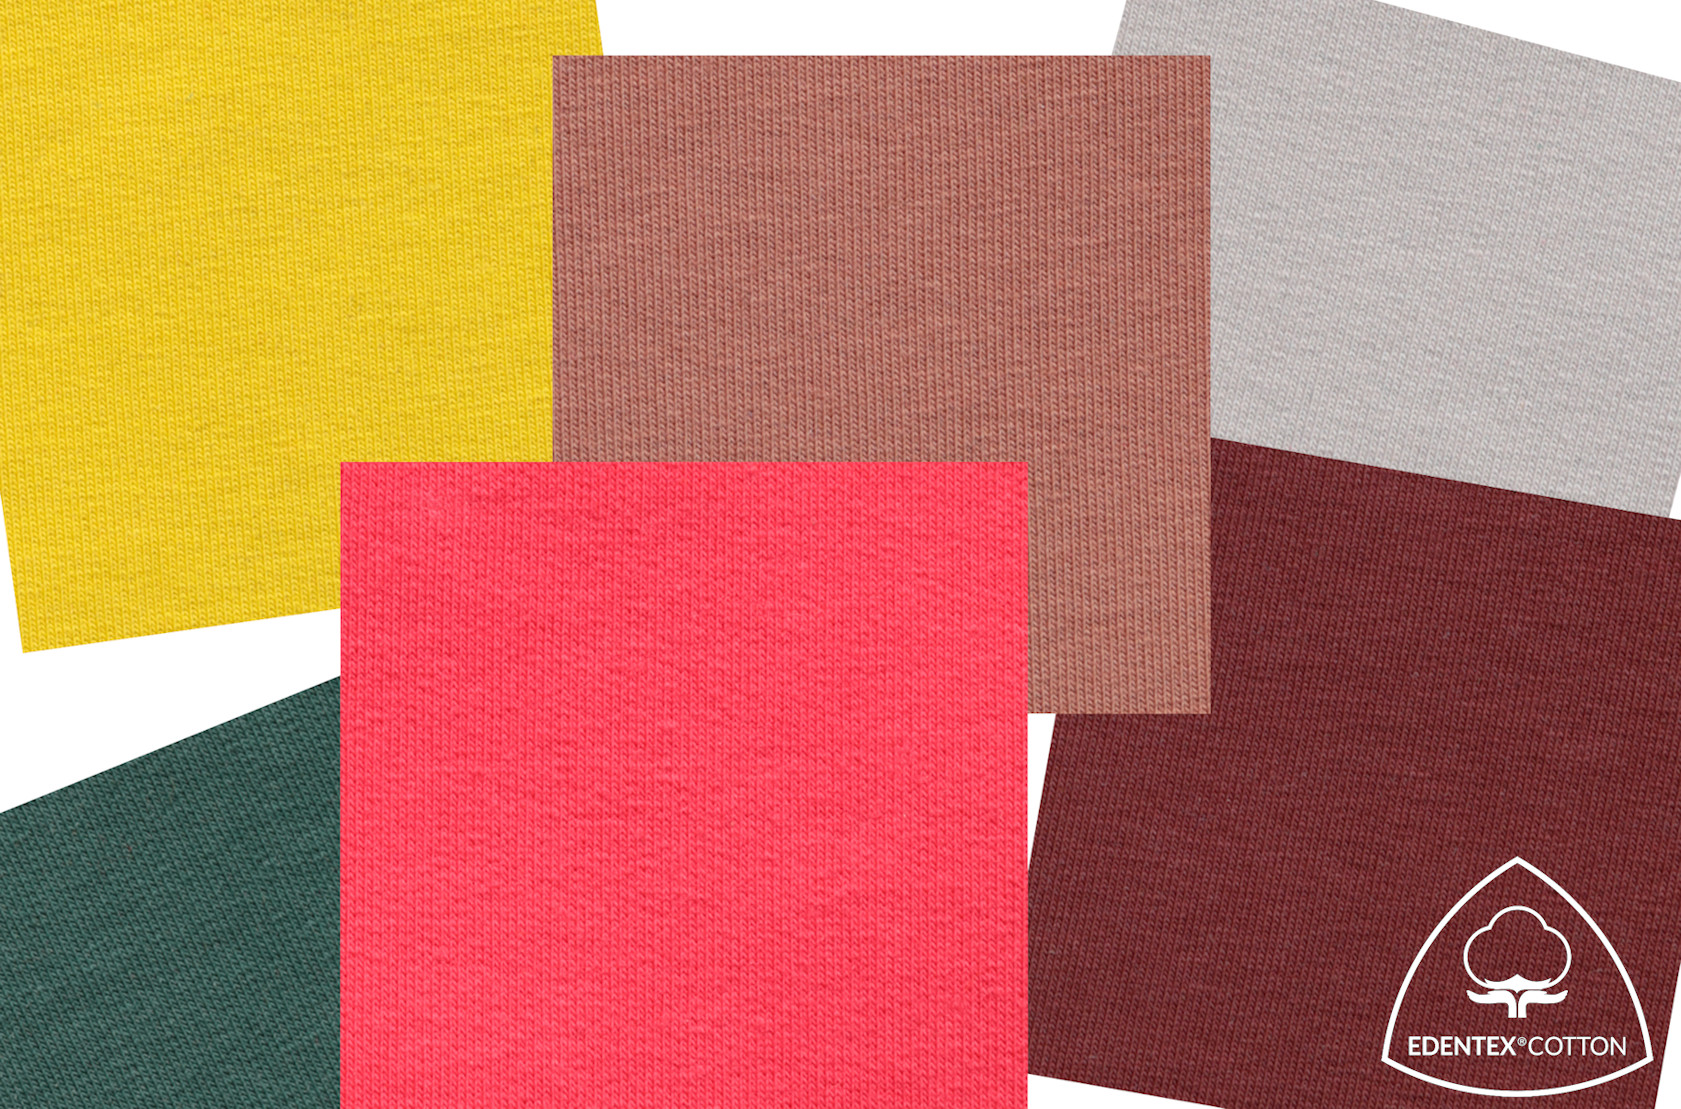 There are two reasons of EDENTEX®’s success: passion for beautiful and durable fabrics and love for cotton.